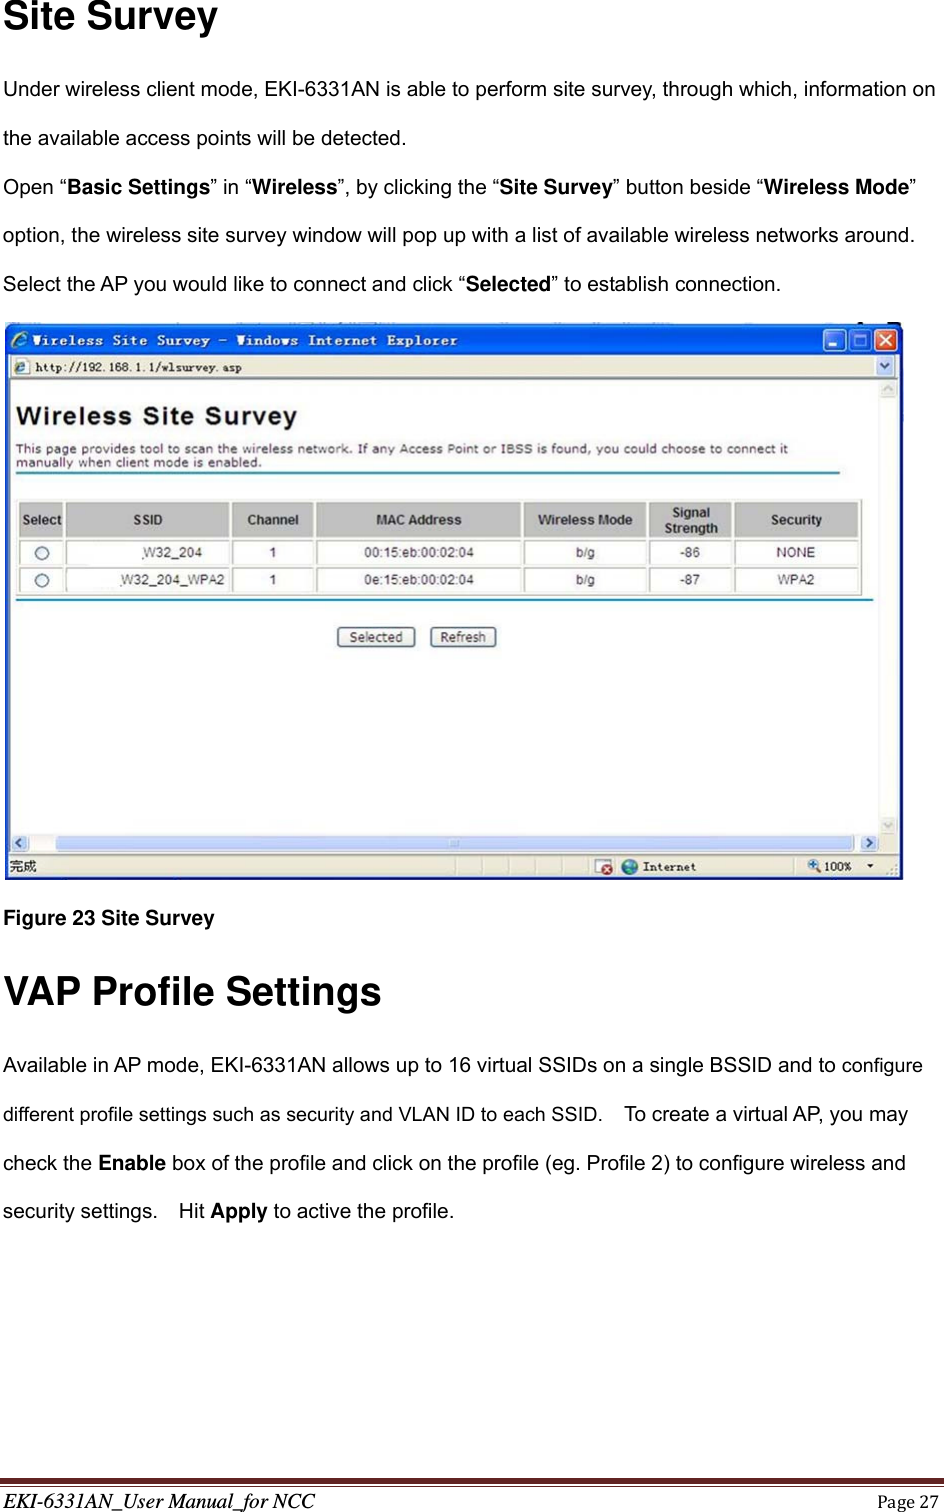 EKI-6331AN_User Manual_for NCCPage27Site Survey Under wireless client mode, EKI-6331AN is able to perform site survey, through which, information on the available access points will be detected. Open “Basic Settings” in “Wireless”, by clicking the “Site Survey” button beside “Wireless Mode” option, the wireless site survey window will pop up with a list of available wireless networks around. Select the AP you would like to connect and click “Selected” to establish connection.    Figure 23 Site Survey VAP Profile Settings Available in AP mode, EKI-6331AN allows up to 16 virtual SSIDs on a single BSSID and to configure different profile settings such as security and VLAN ID to each SSID.    To create a virtual AP, you may check the Enable box of the profile and click on the profile (eg. Profile 2) to configure wireless and security settings.  Hit Apply to active the profile.  